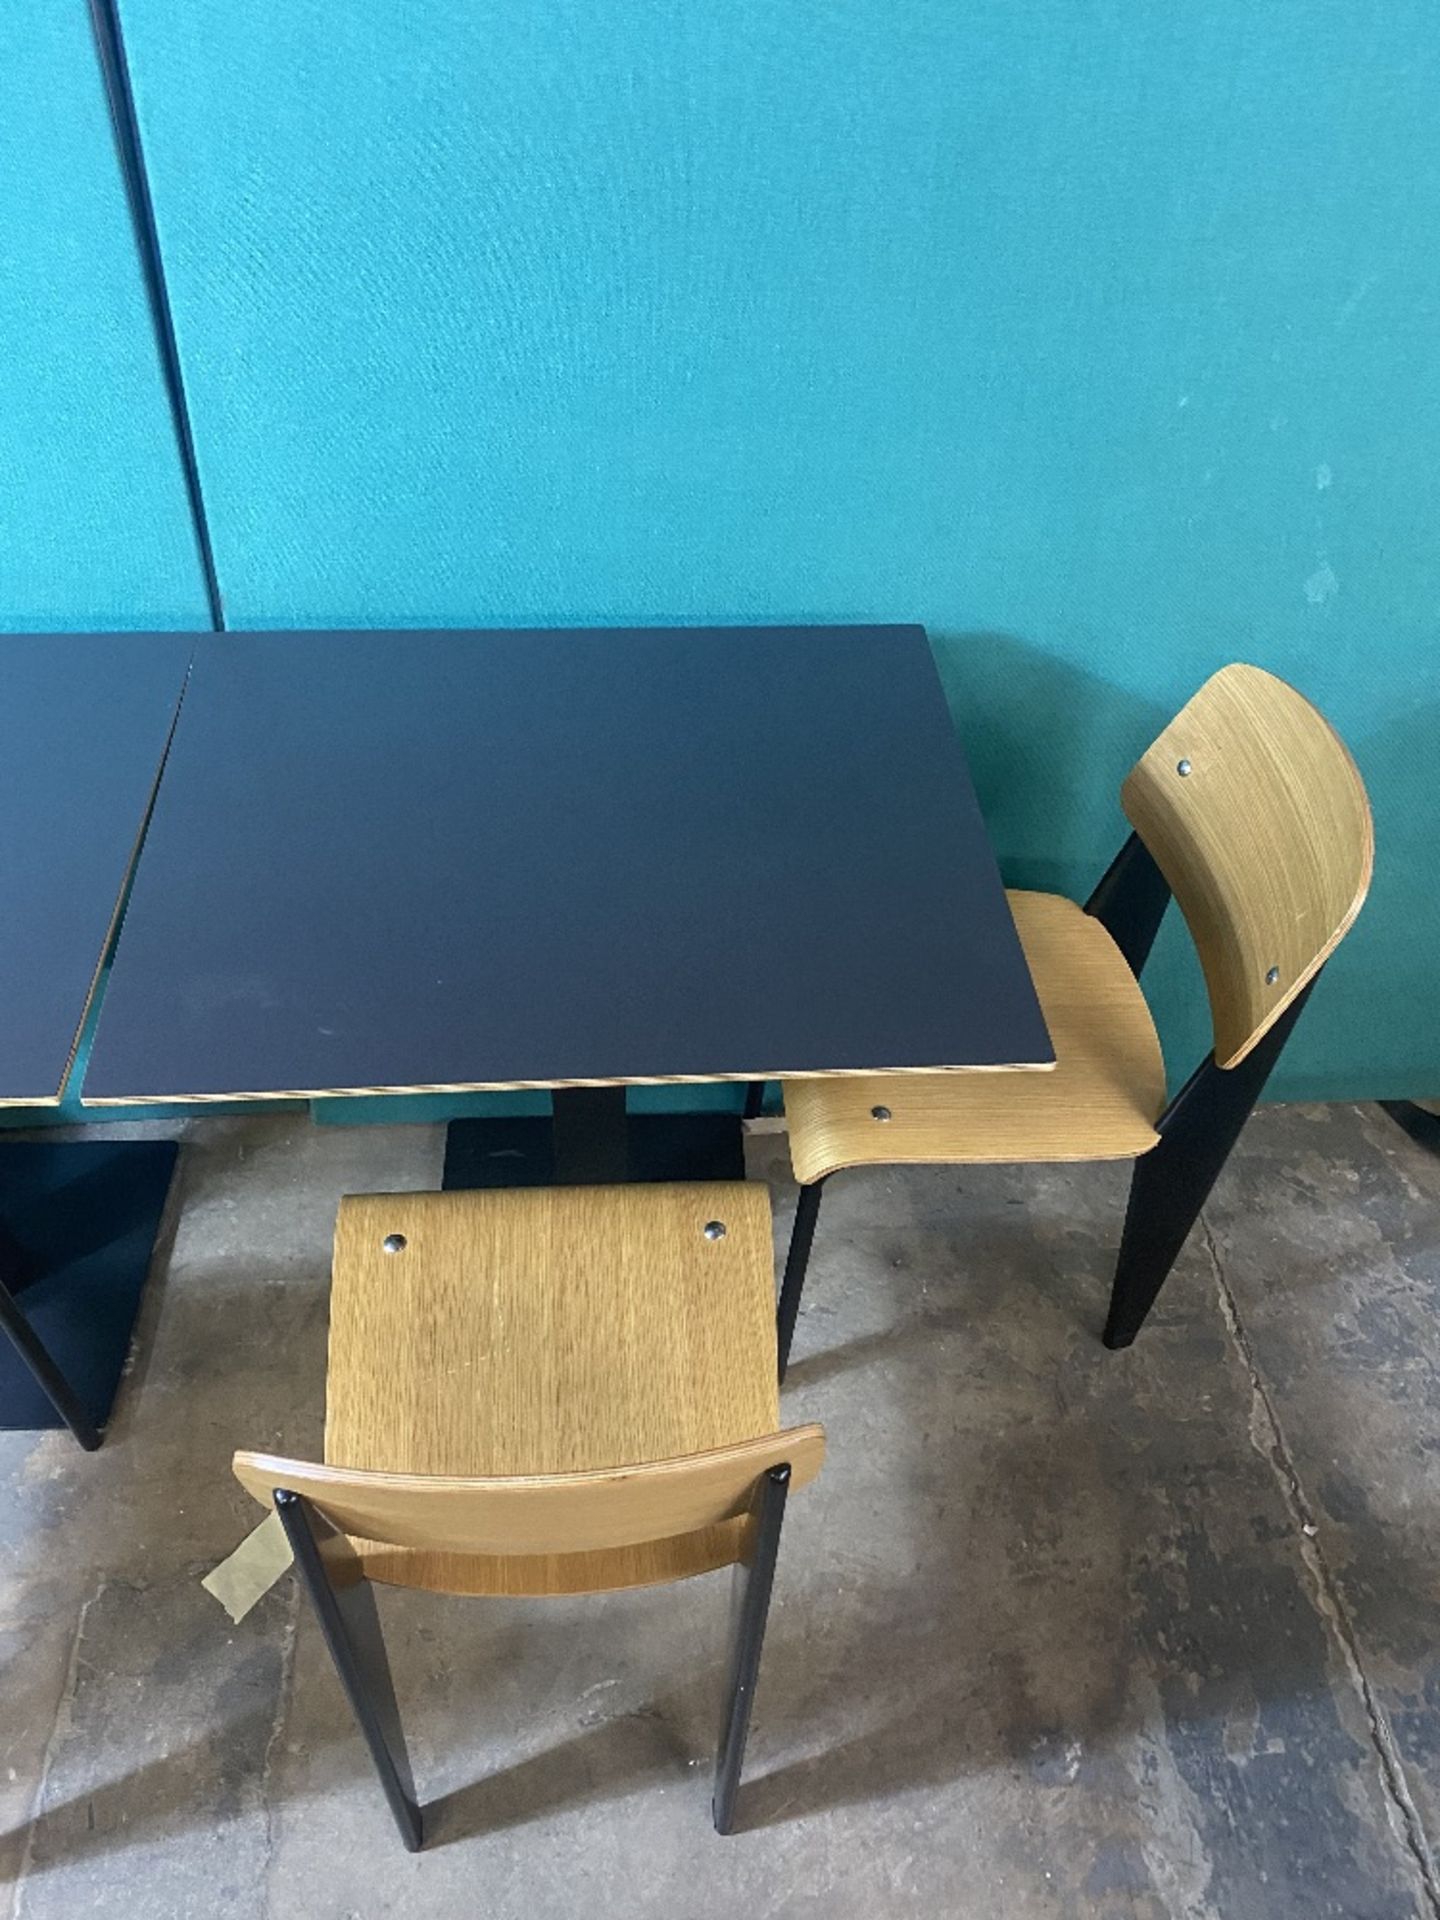 Pair Of Black Bistro Tables & Chairs Sets - See Description & Photos - Image 3 of 12